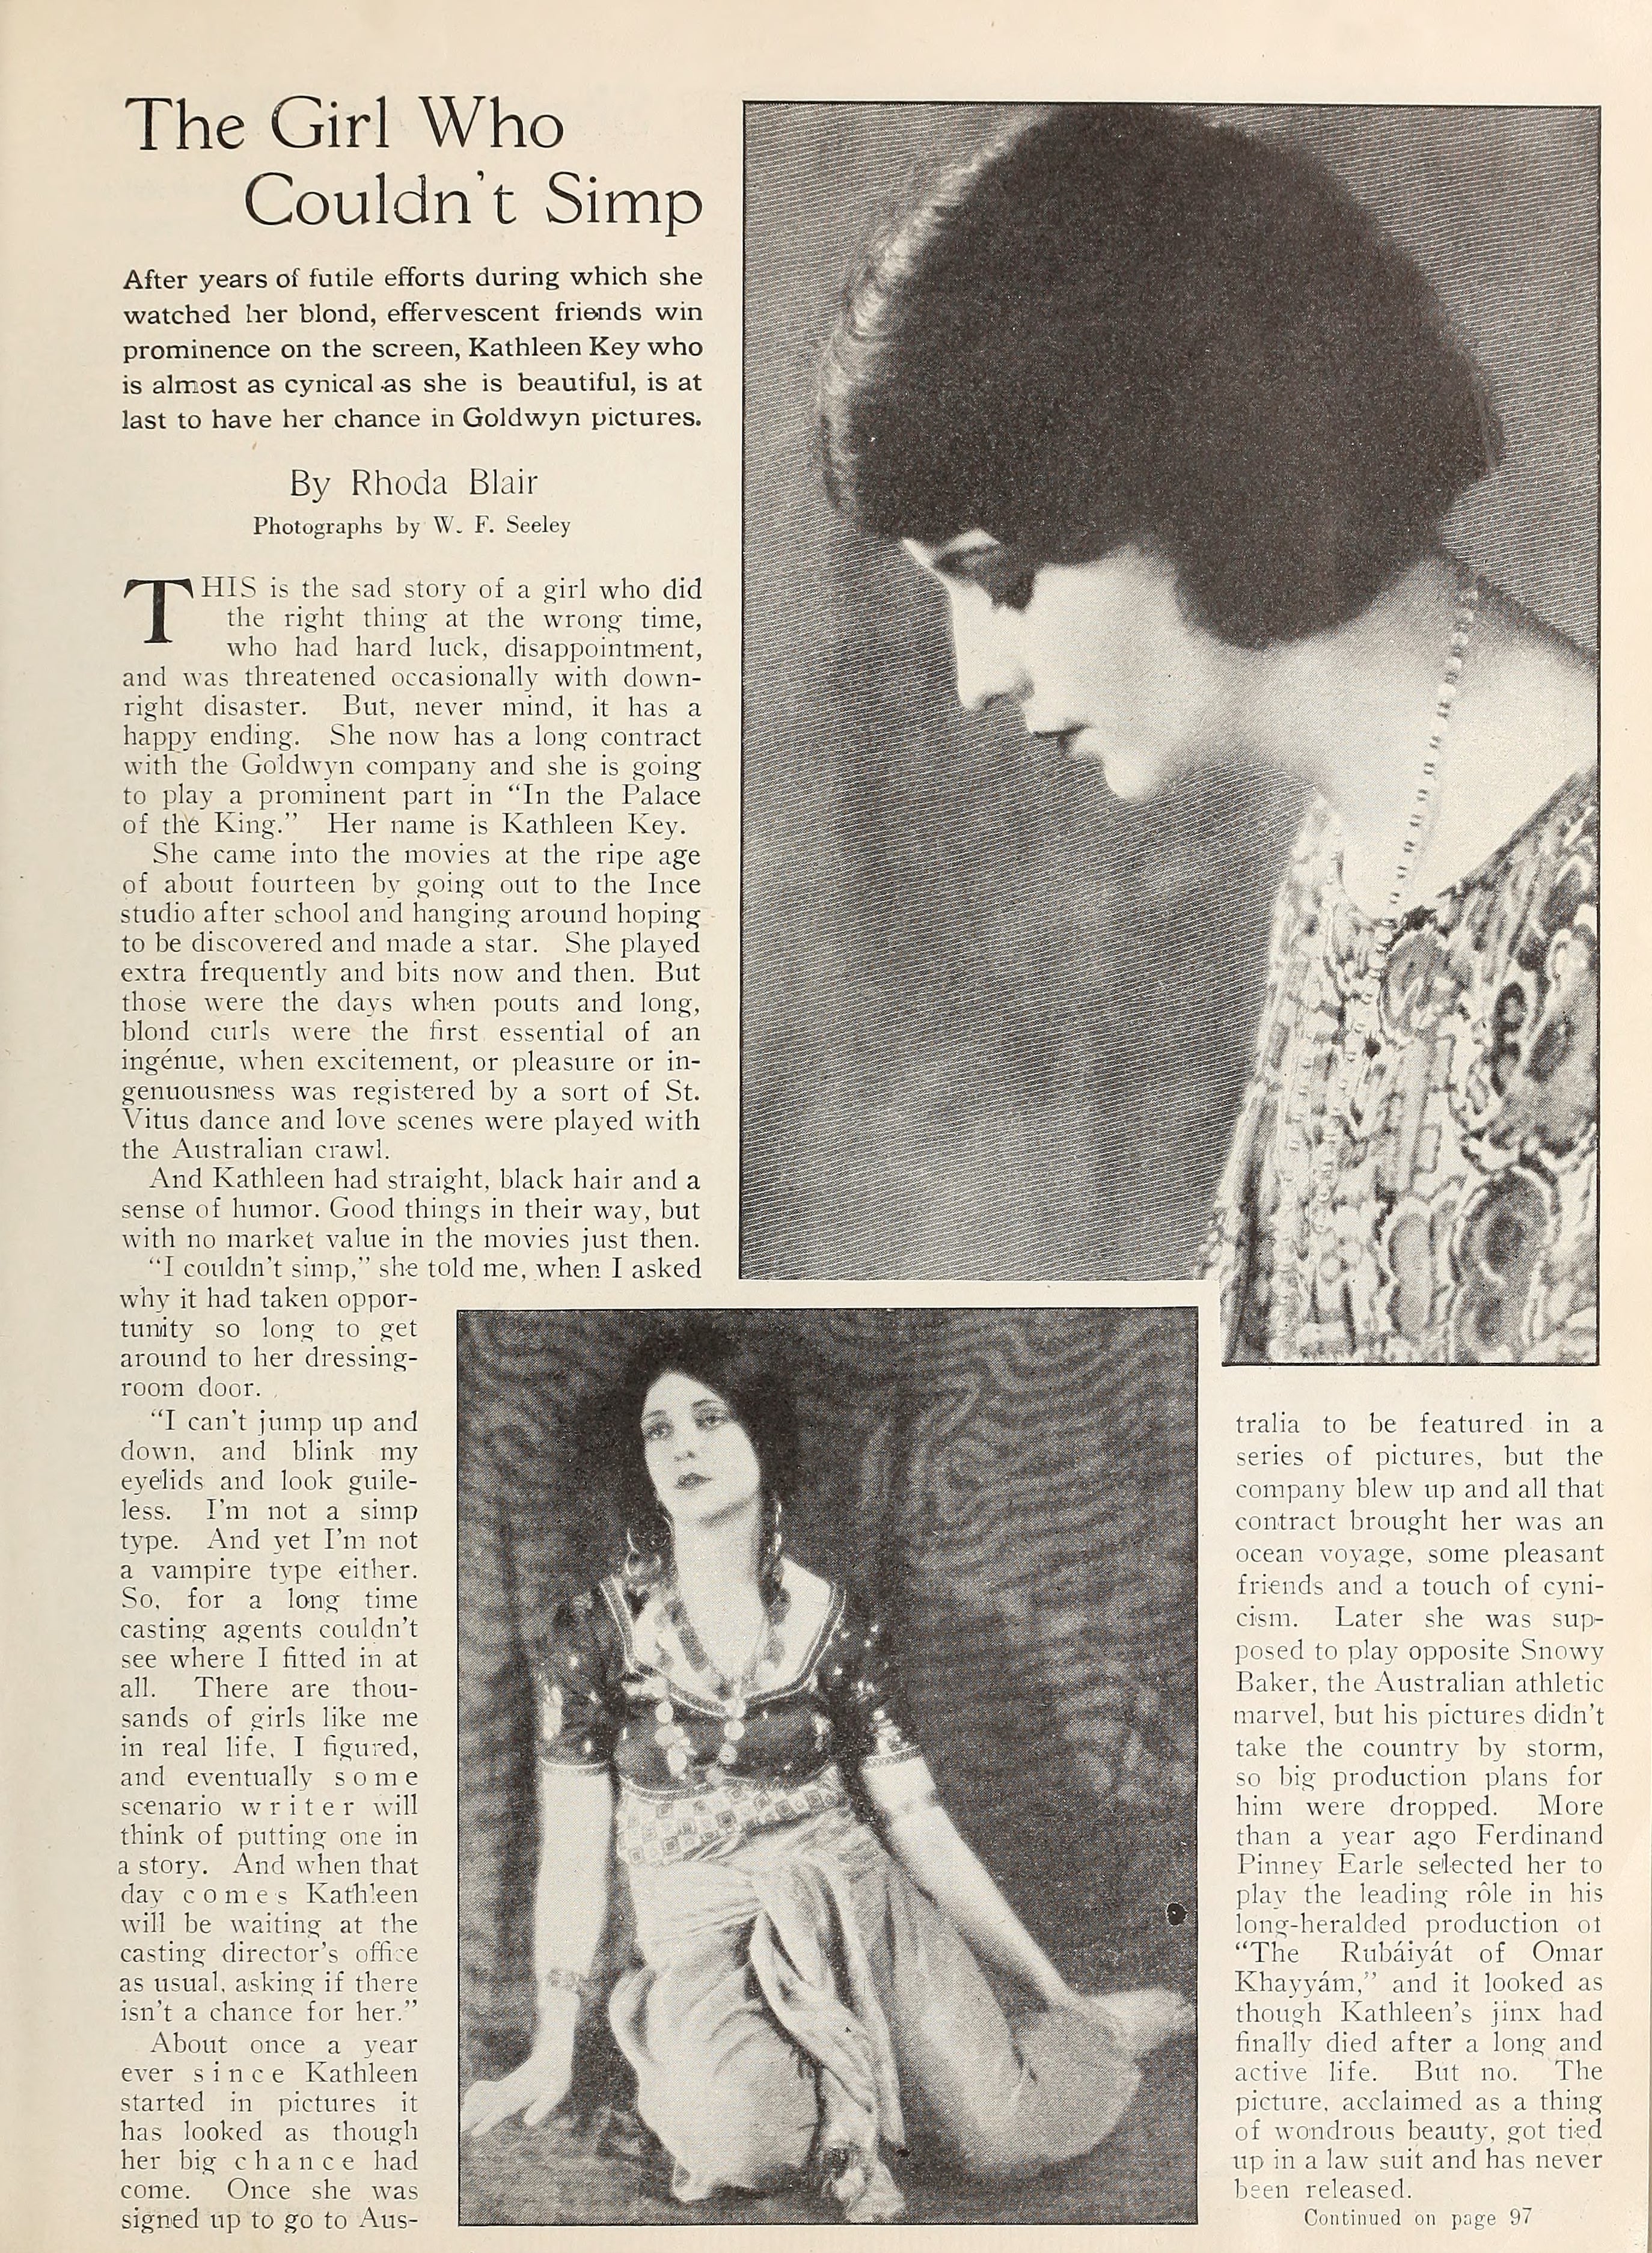 Kathleen Key — The Girl Who Couldn’t Simp (1923) | www.vintoz.com